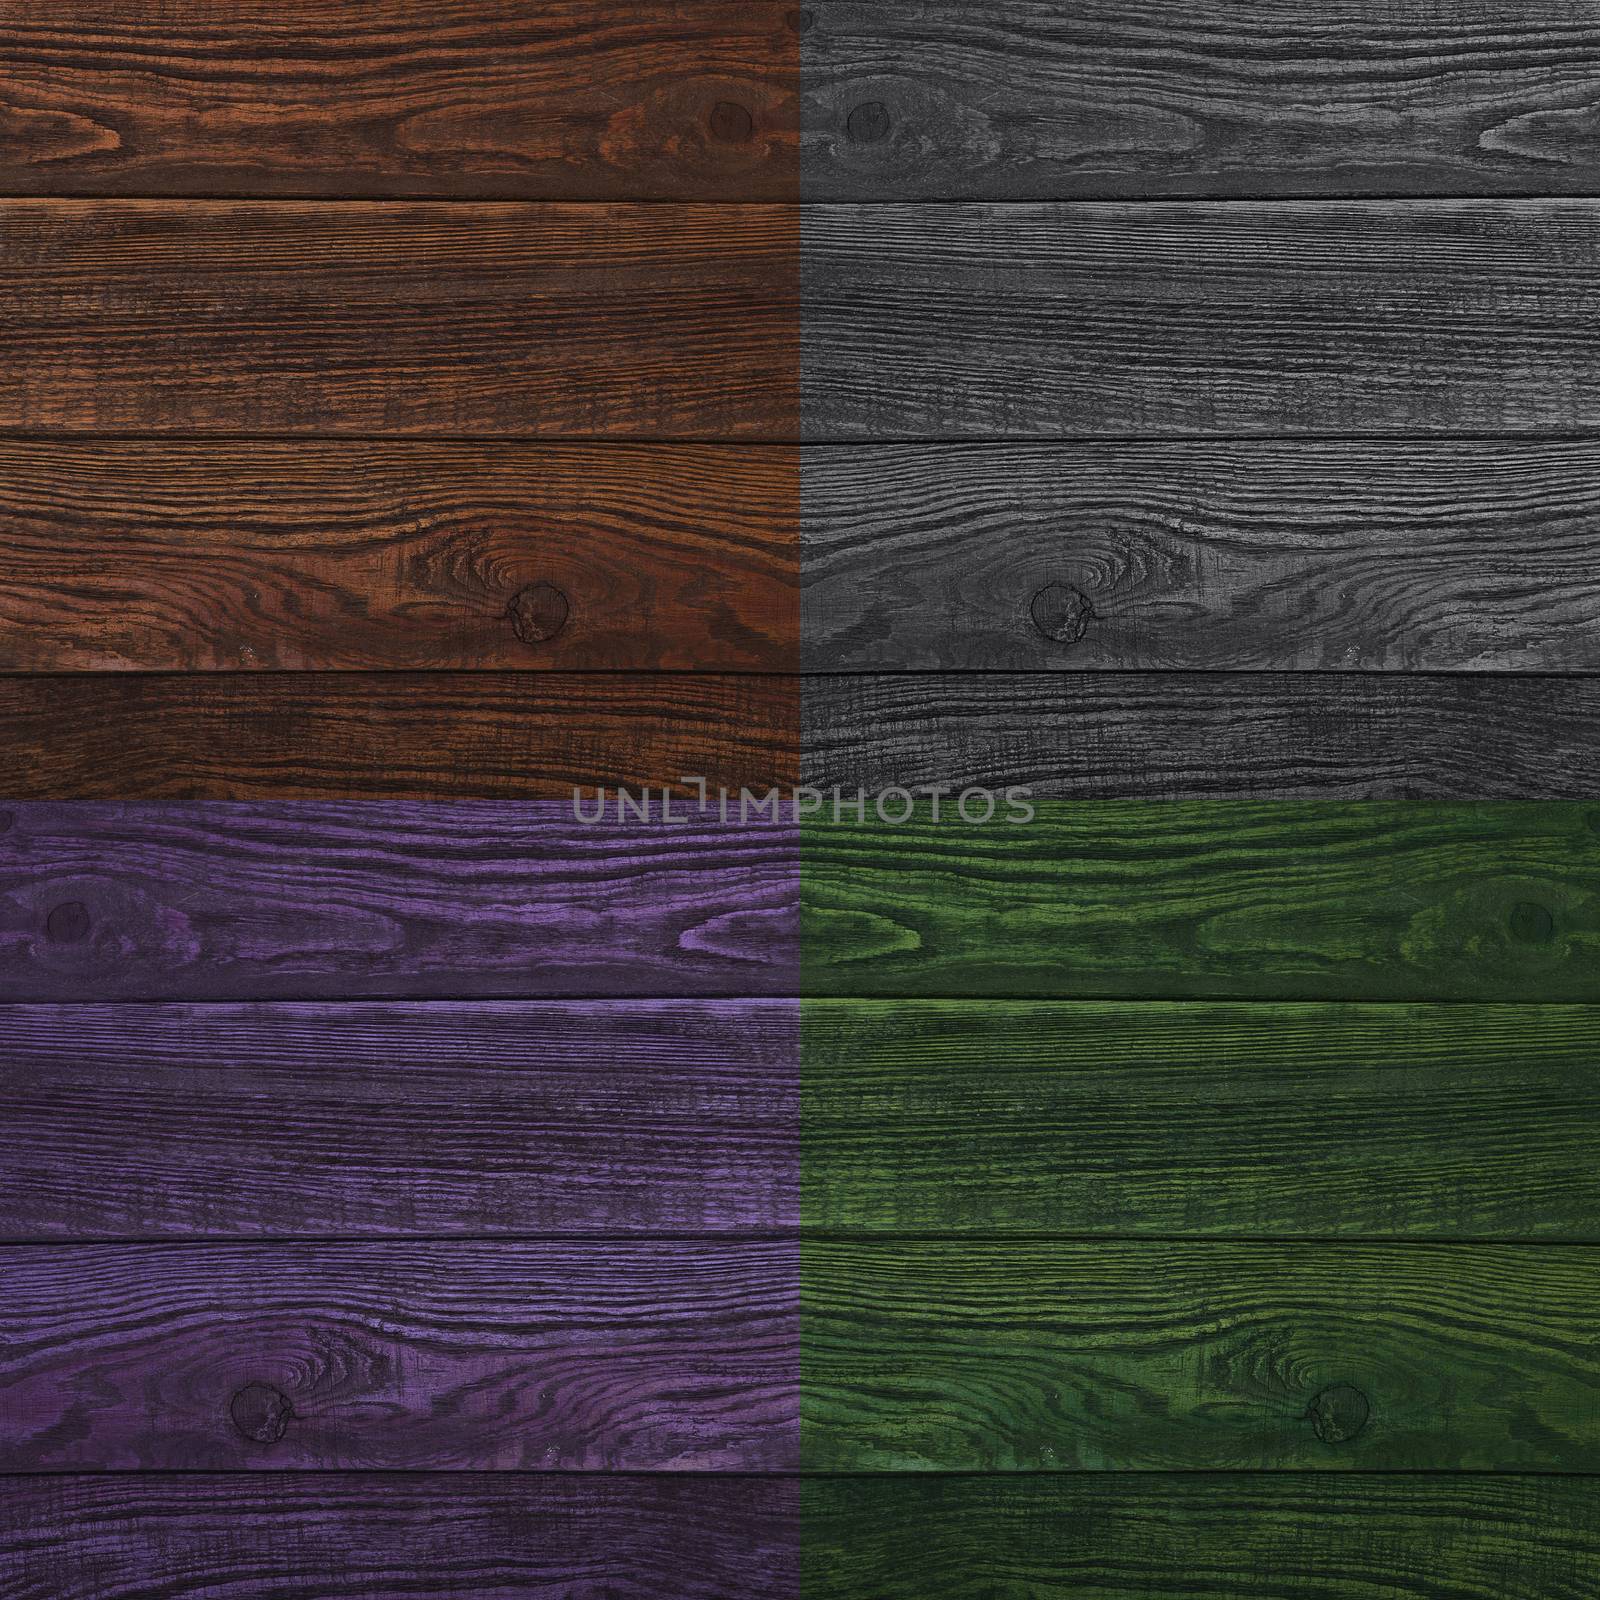 Collage of wooden surfaces four different colors by natazhekova